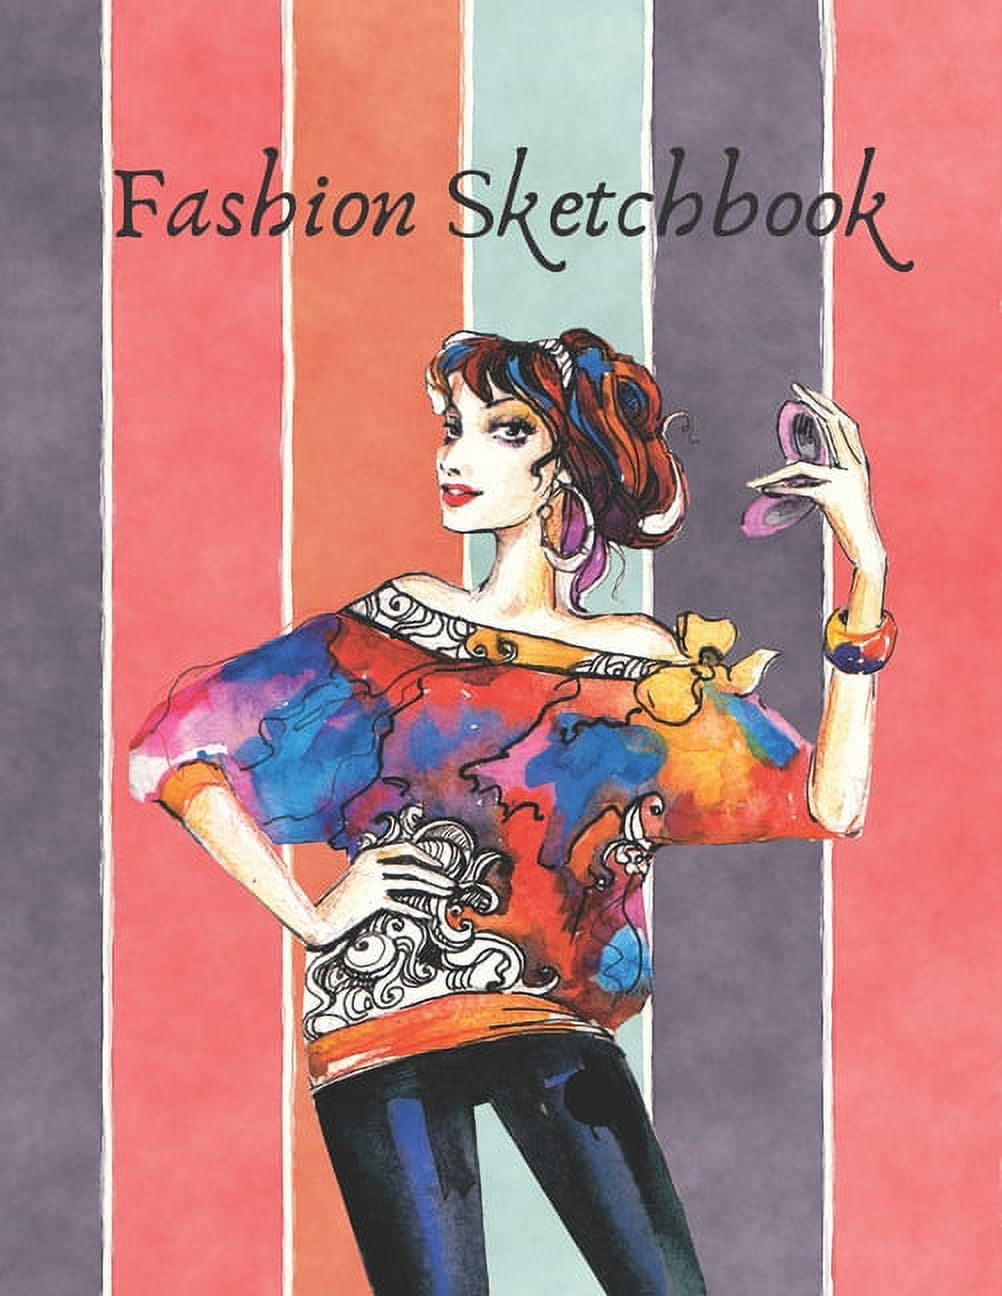 High Fashion Design Sketchbook Interior Graphic by K1andK2 · Creative  Fabrica